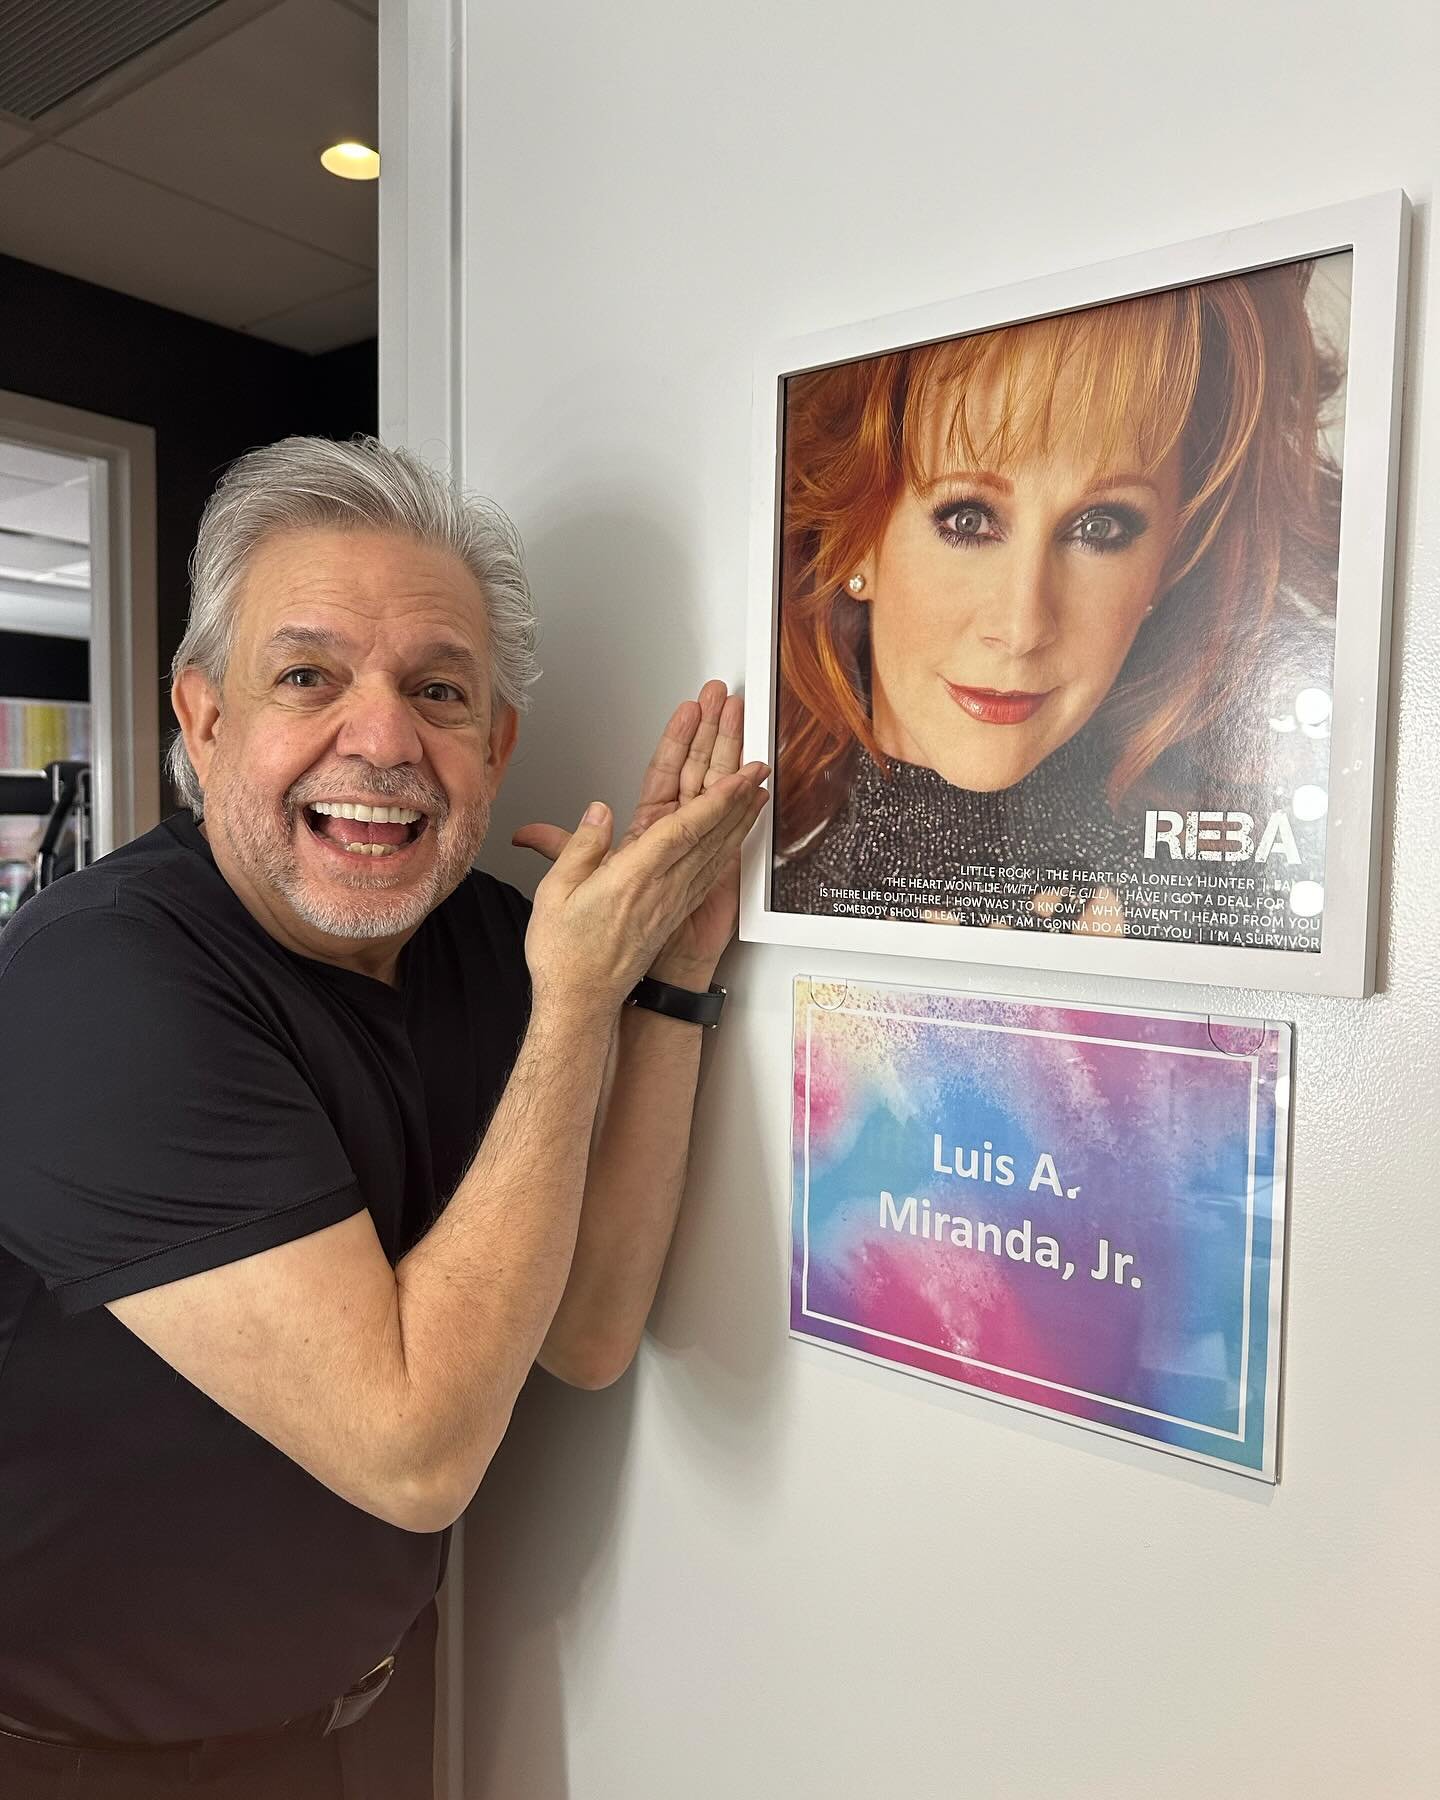 Getting ready to join @kellyclarkson while getting ready in a green room with @reba picture 🫨!!!